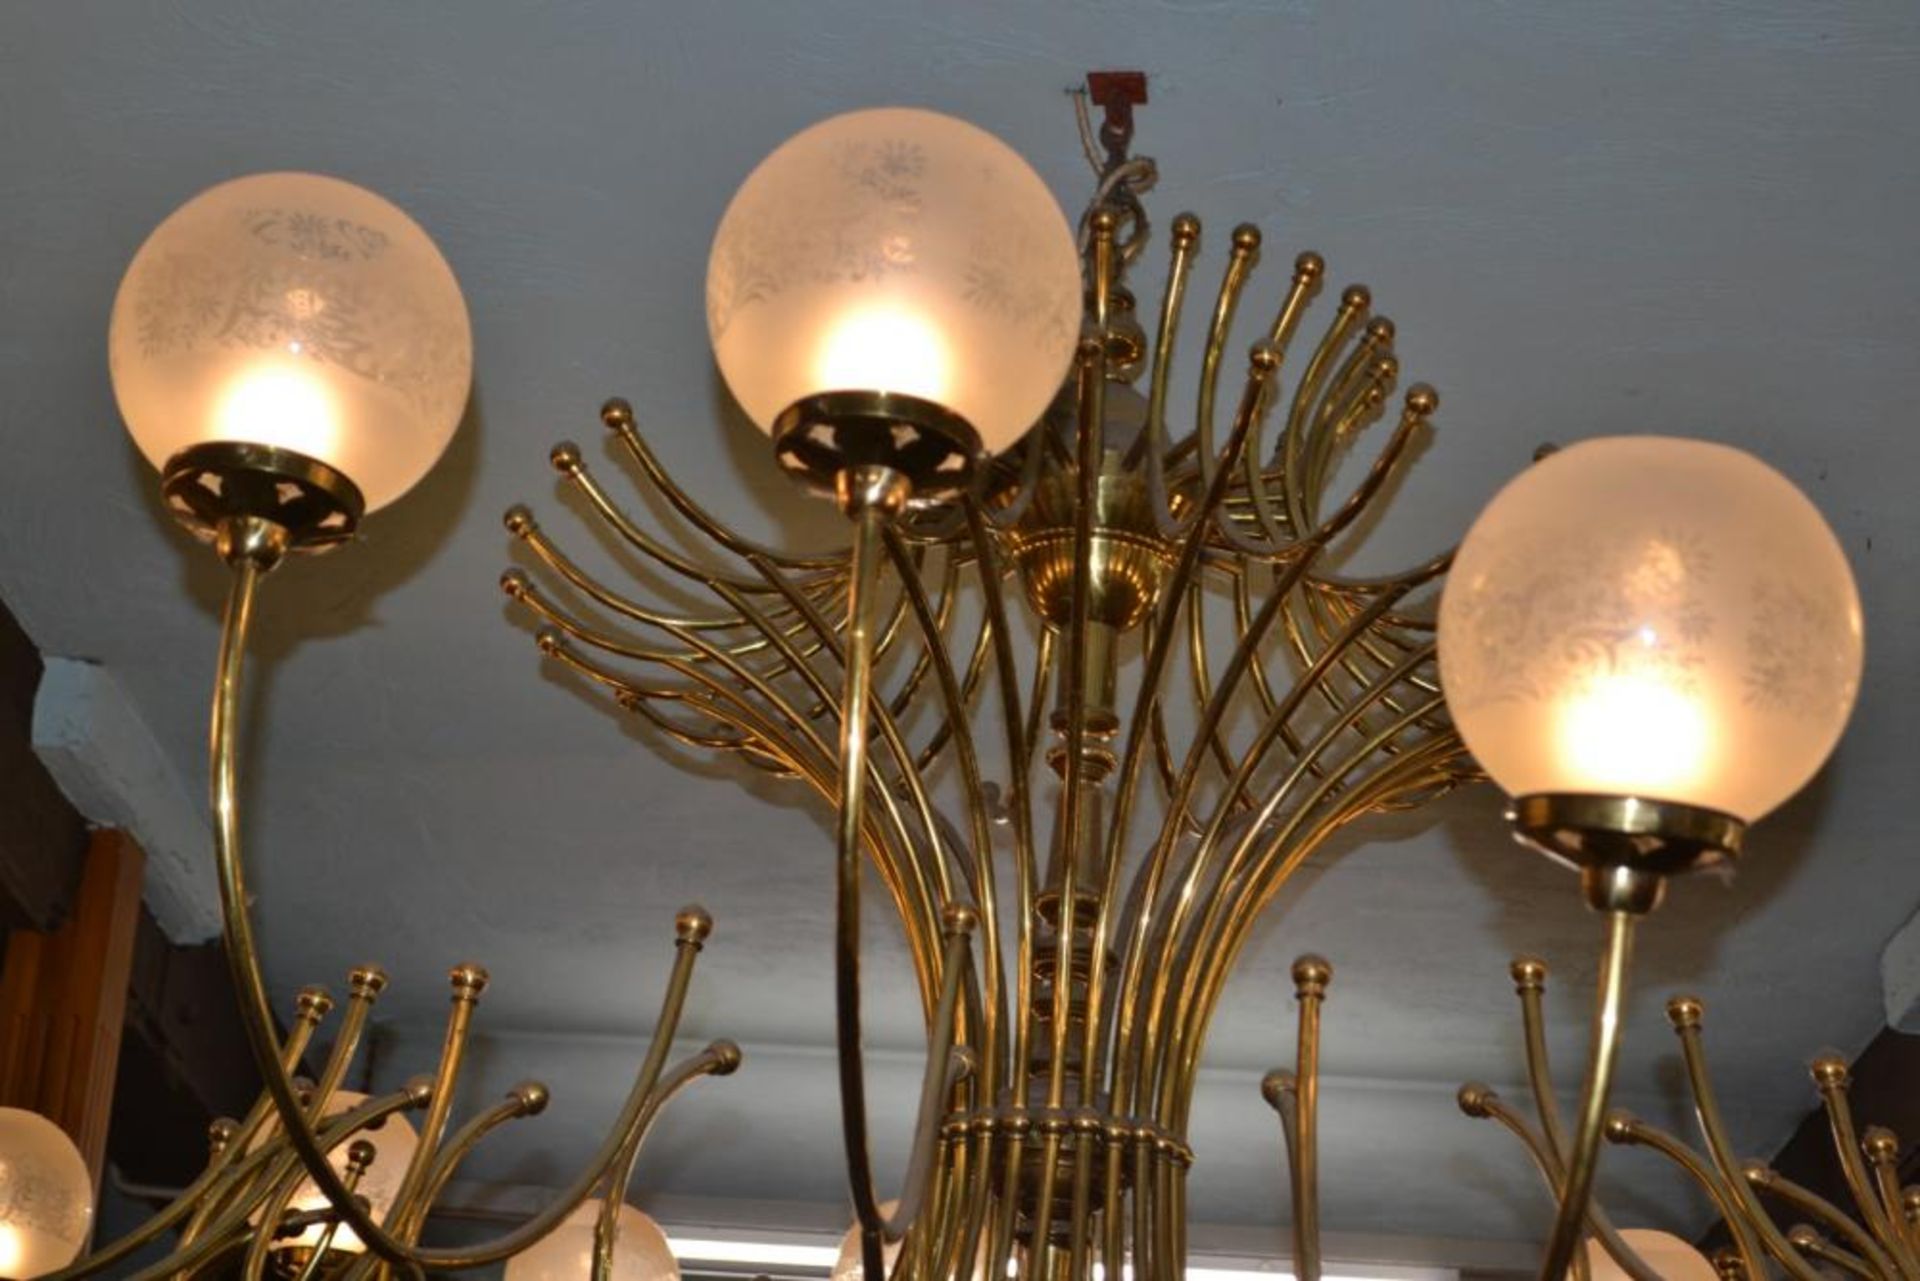 1 x Vintage 24 Light Brass Chandelier With Opaque Globe Shades - 261 cms Width - Ref BB000 - CL351 - - Image 5 of 7